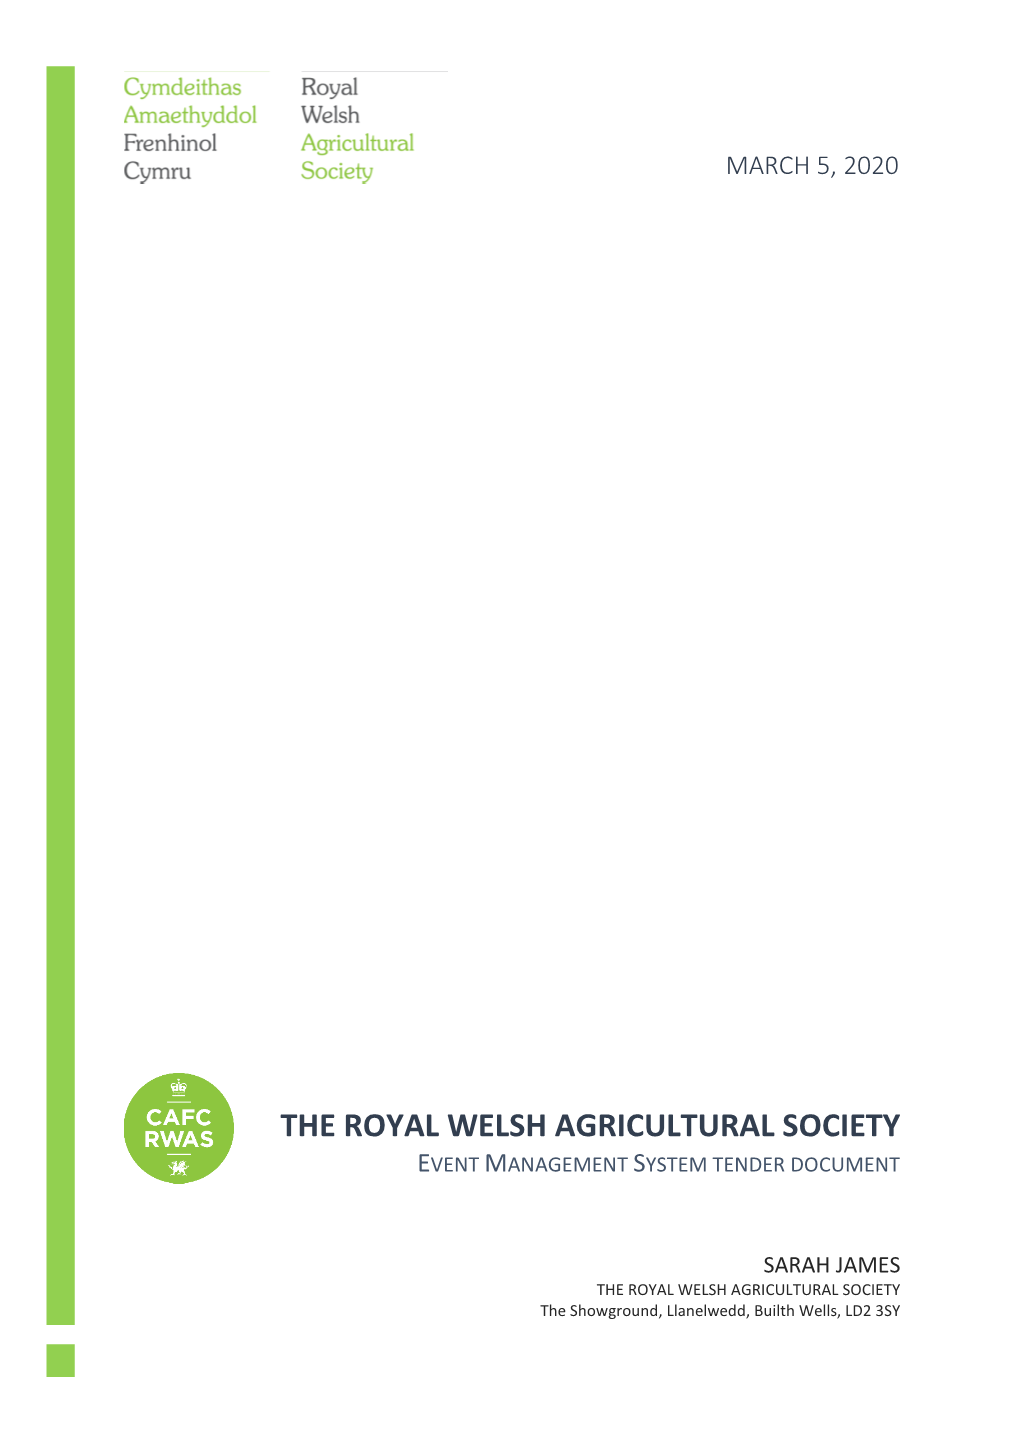 The Royal Welsh Agricultural Society Event Management System Tender Document